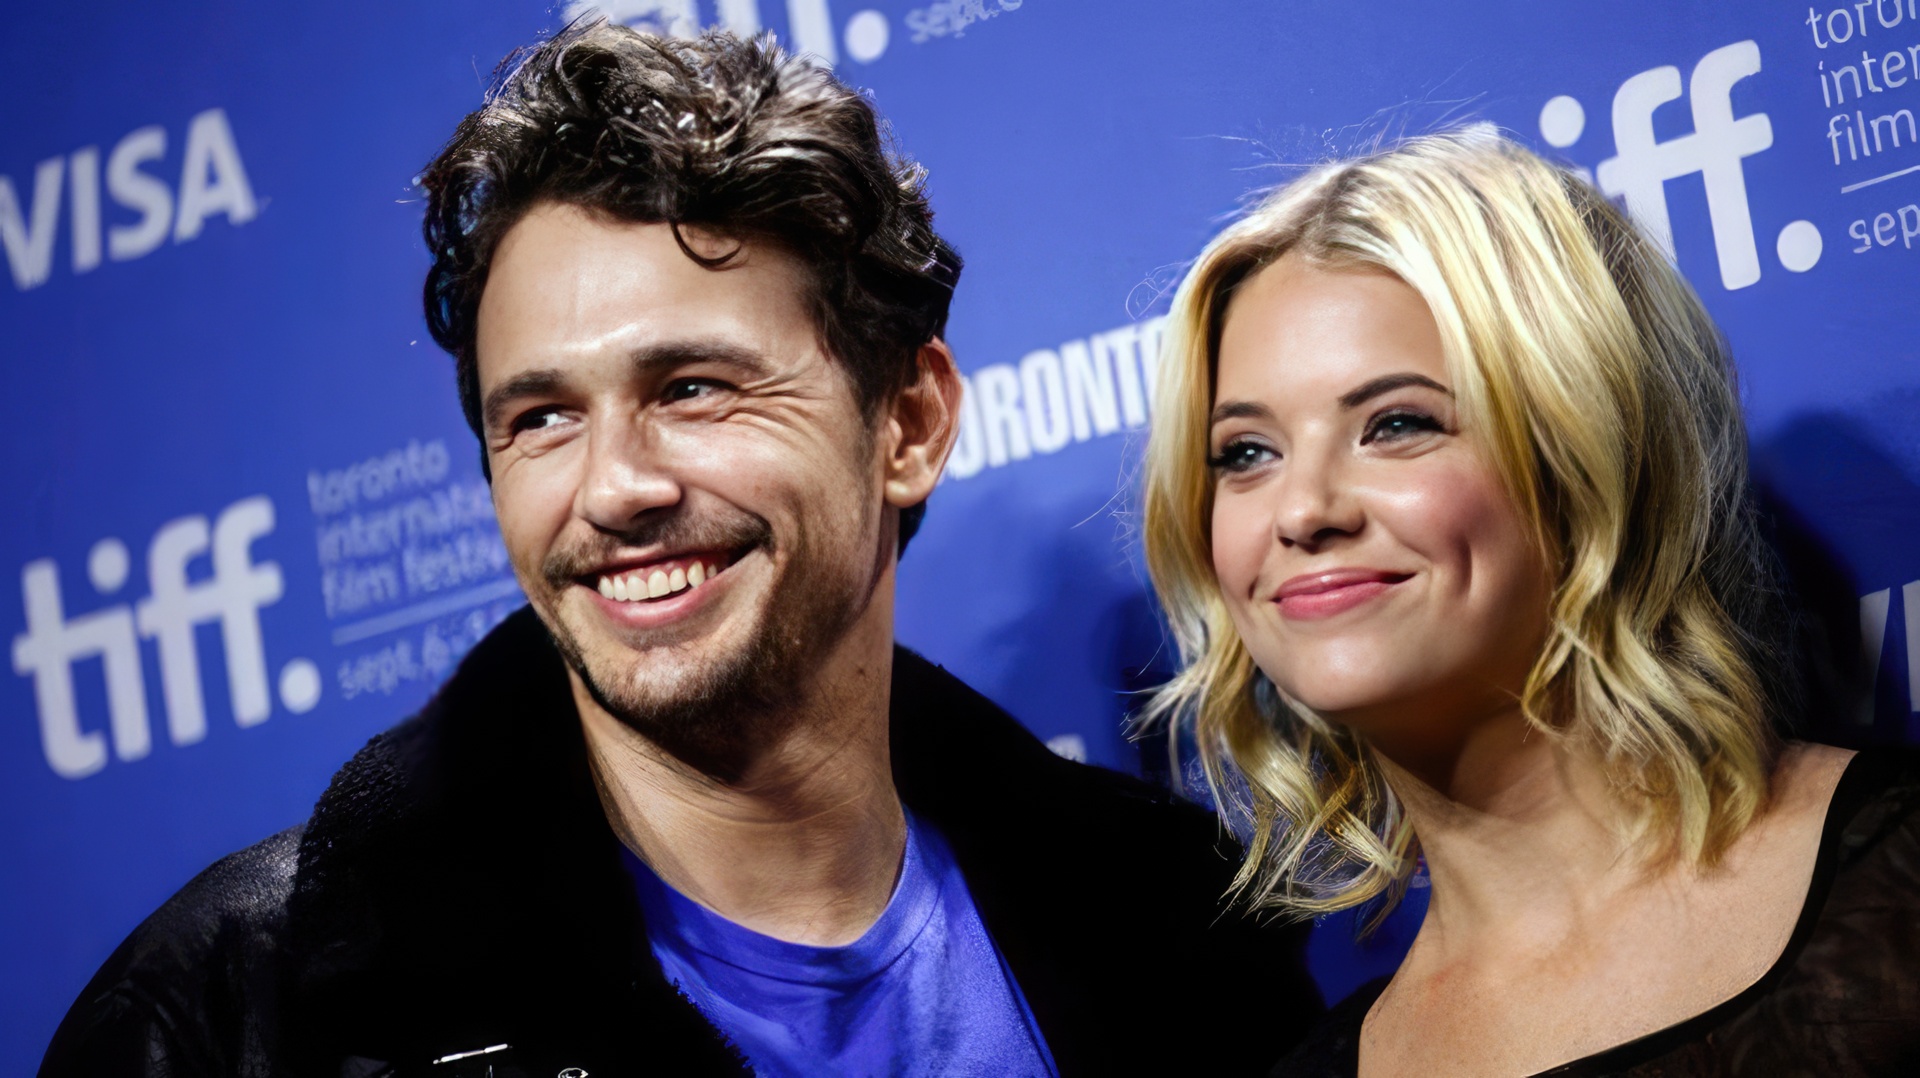 Ashley Benson and James Franco are friends